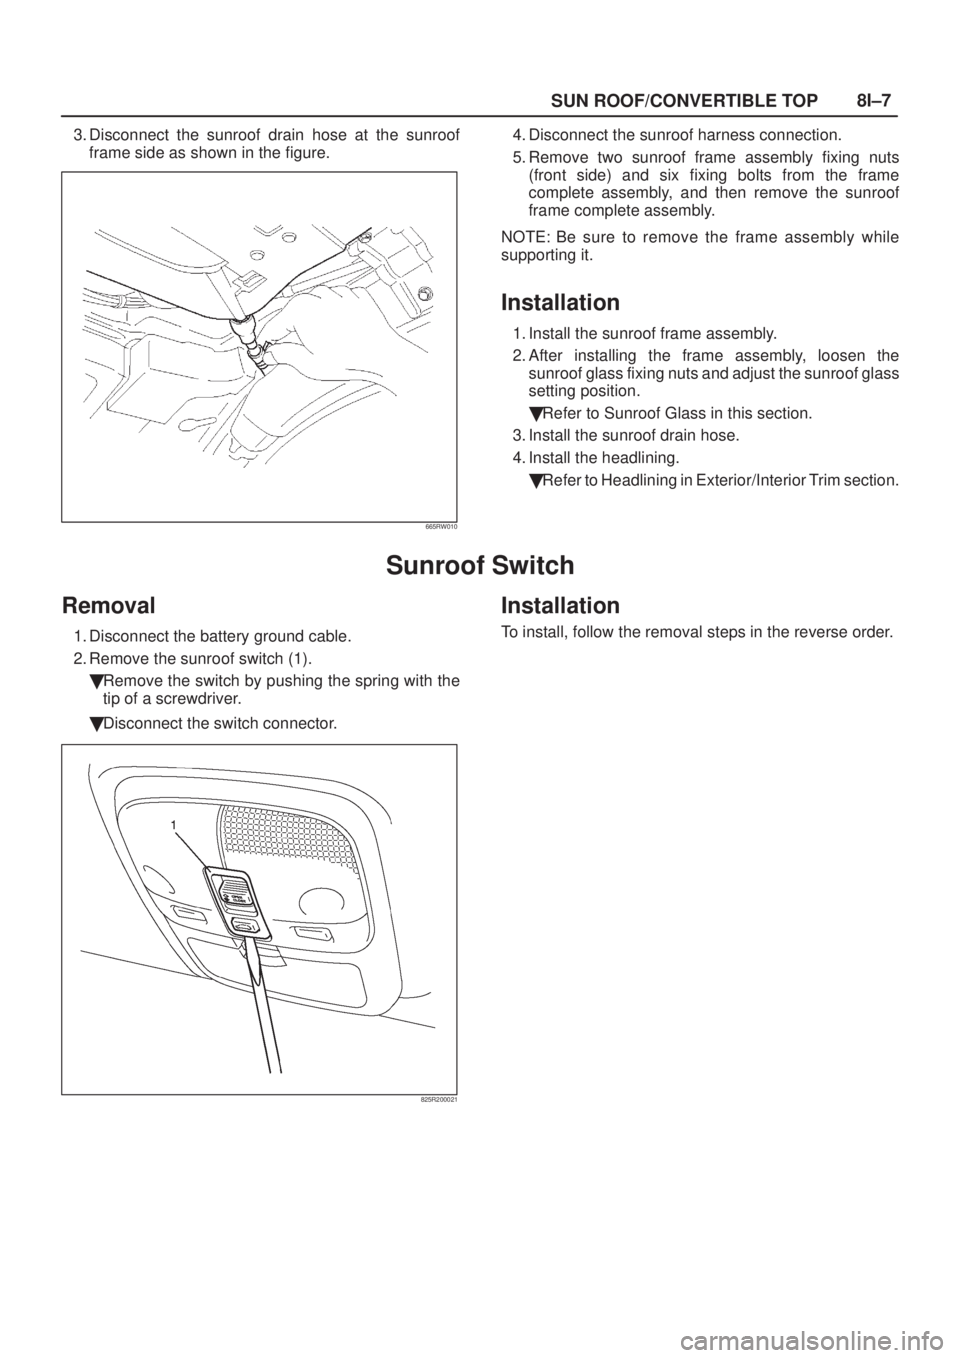 ISUZU AXIOM 2002  Service Repair Manual SUN ROOF/CONVERTIBLE TOP8I±7
3. Disconnect the sunroof drain hose at the sunroof
frame side as shown in the figure.
665RW010
4. Disconnect the sunroof harness connection.
5. Remove two sunroof frame 